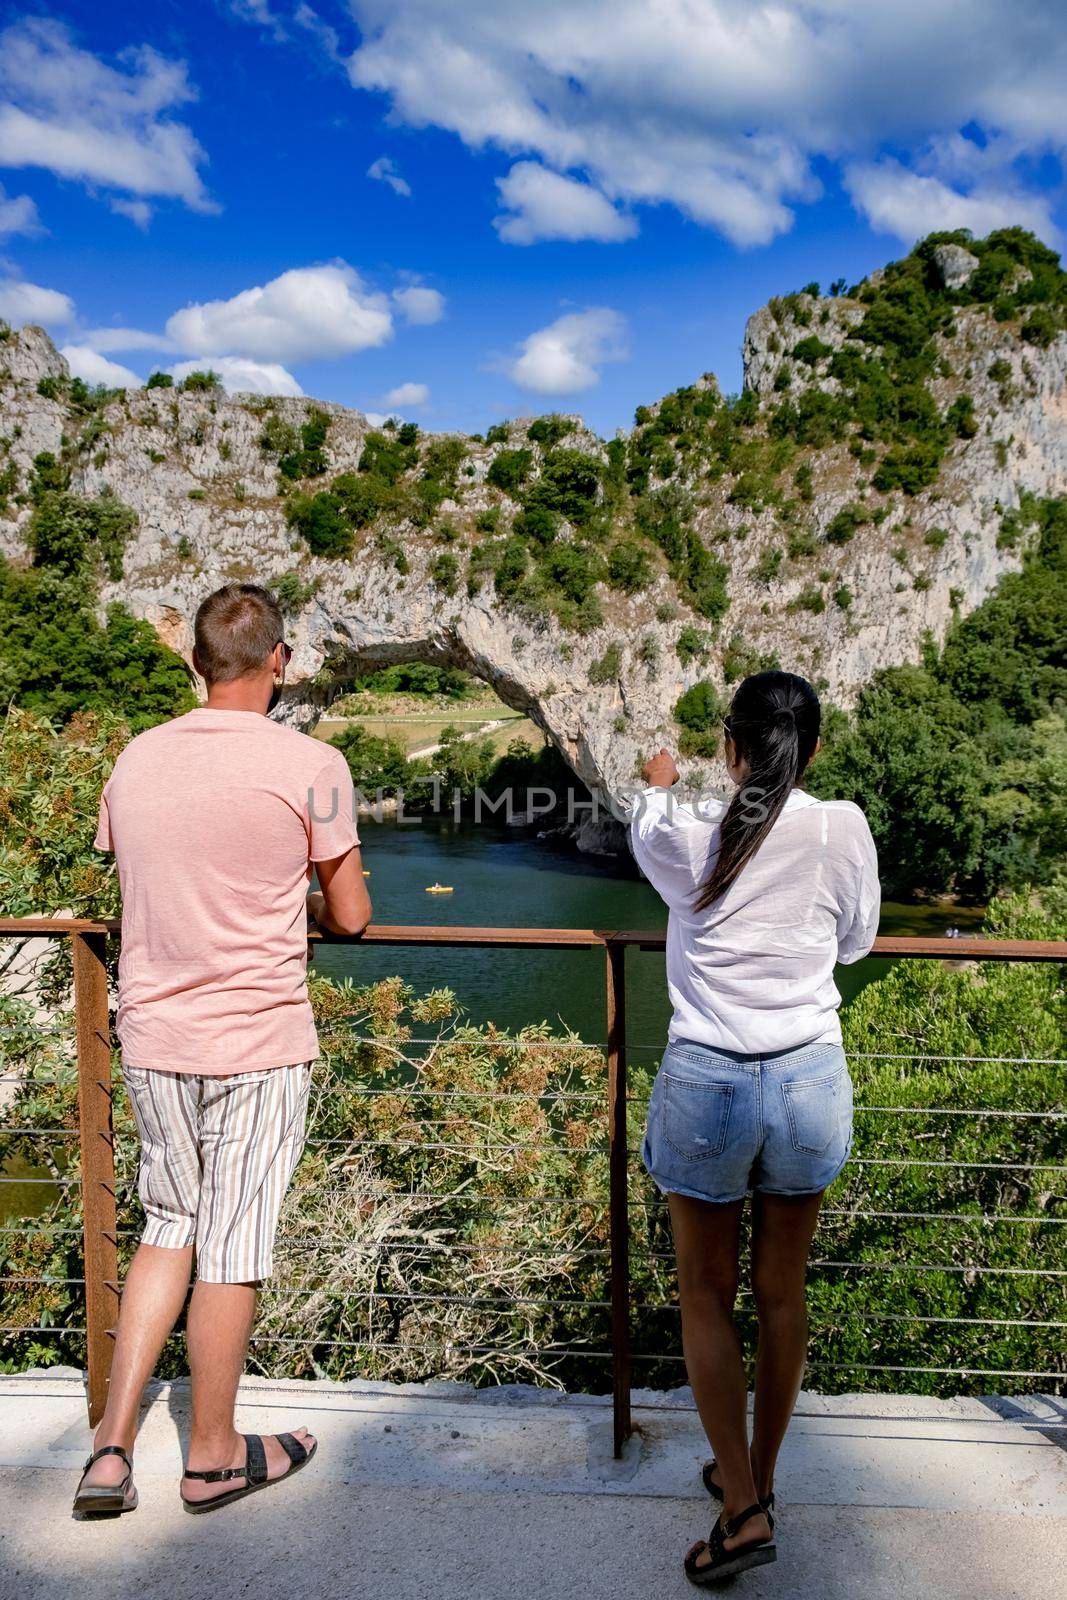 The famous natural bridge of Pont d'Arc in Ardeche department in France Ardeche by fokkebok